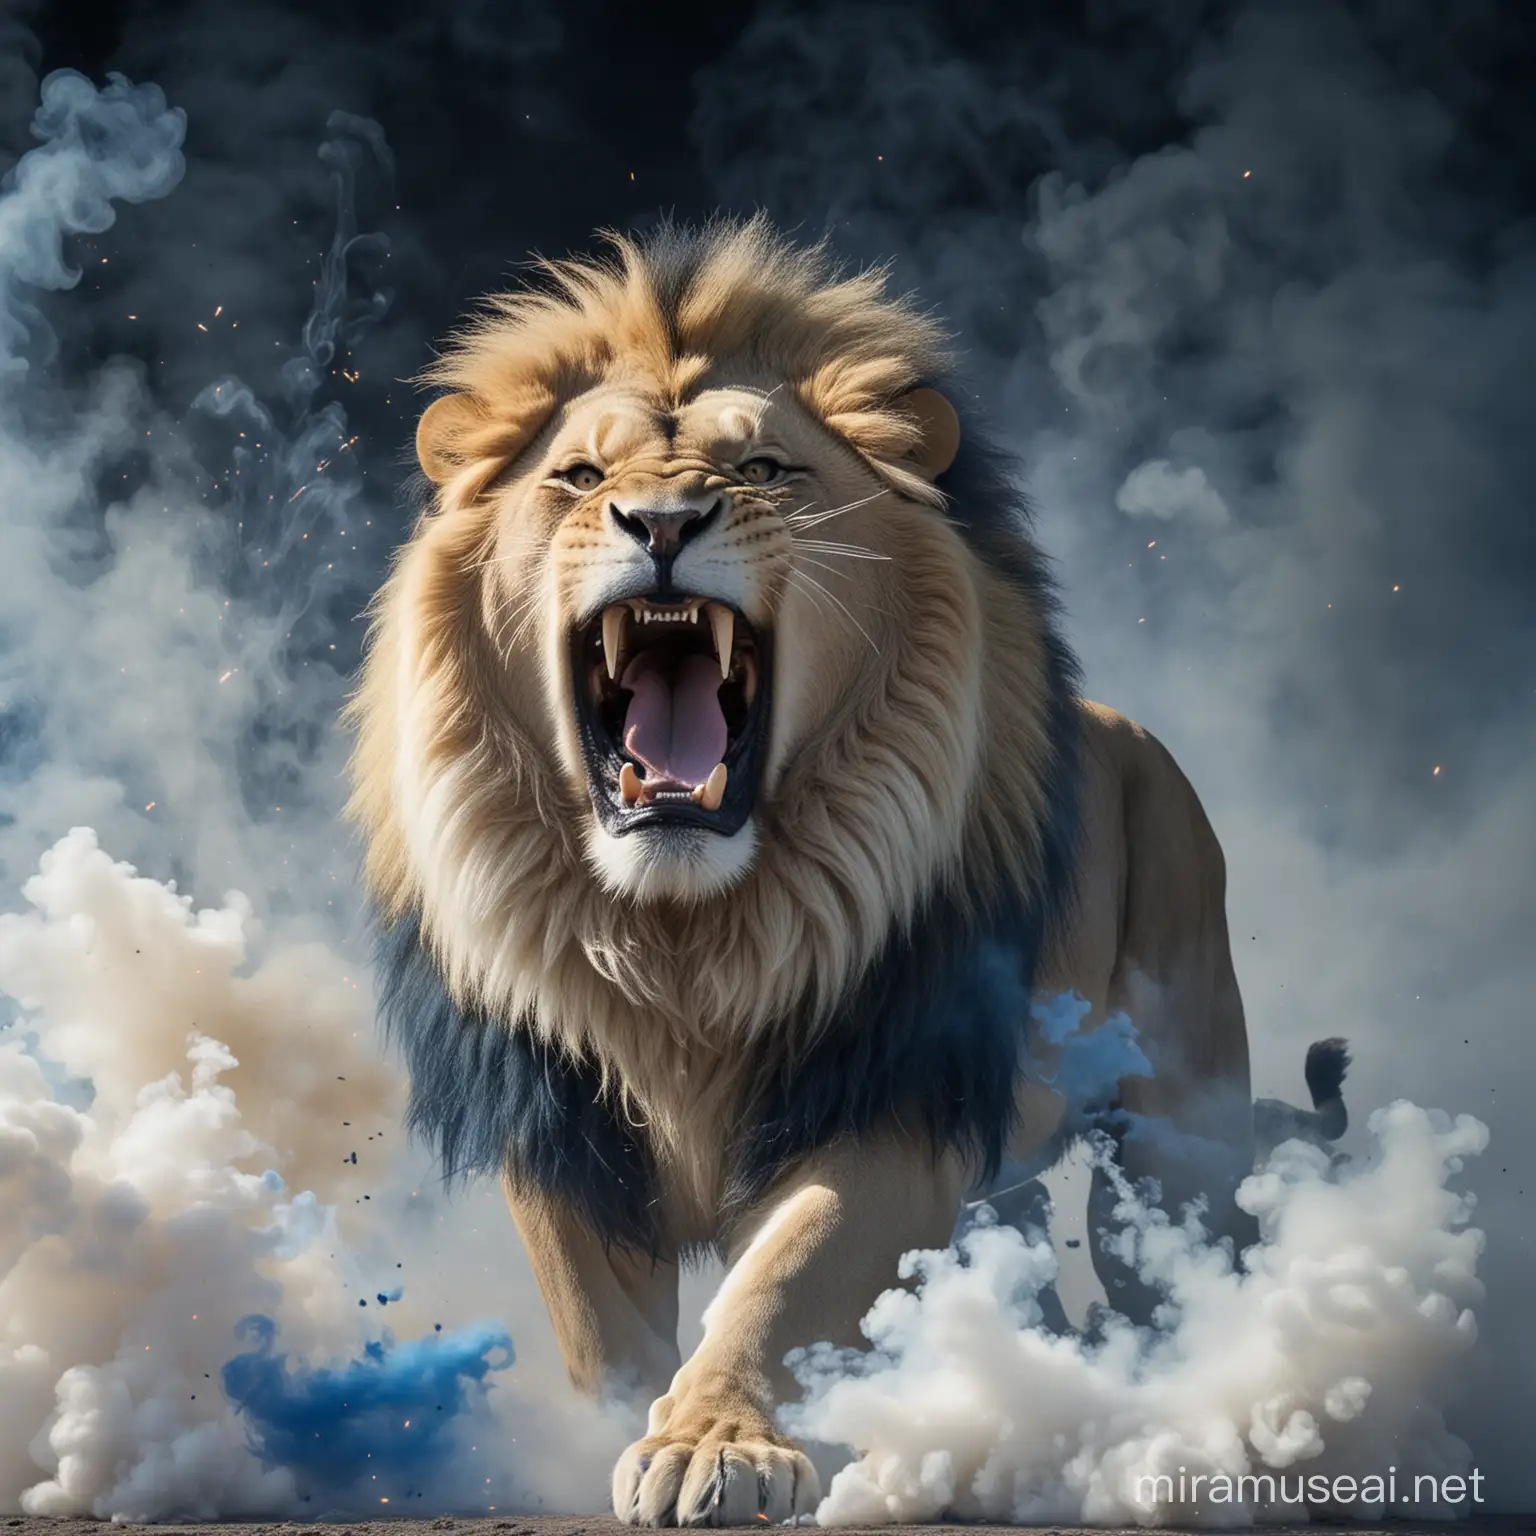 Majestic Lion Roaring amidst Vibrant Blue and White Pyrotechnics